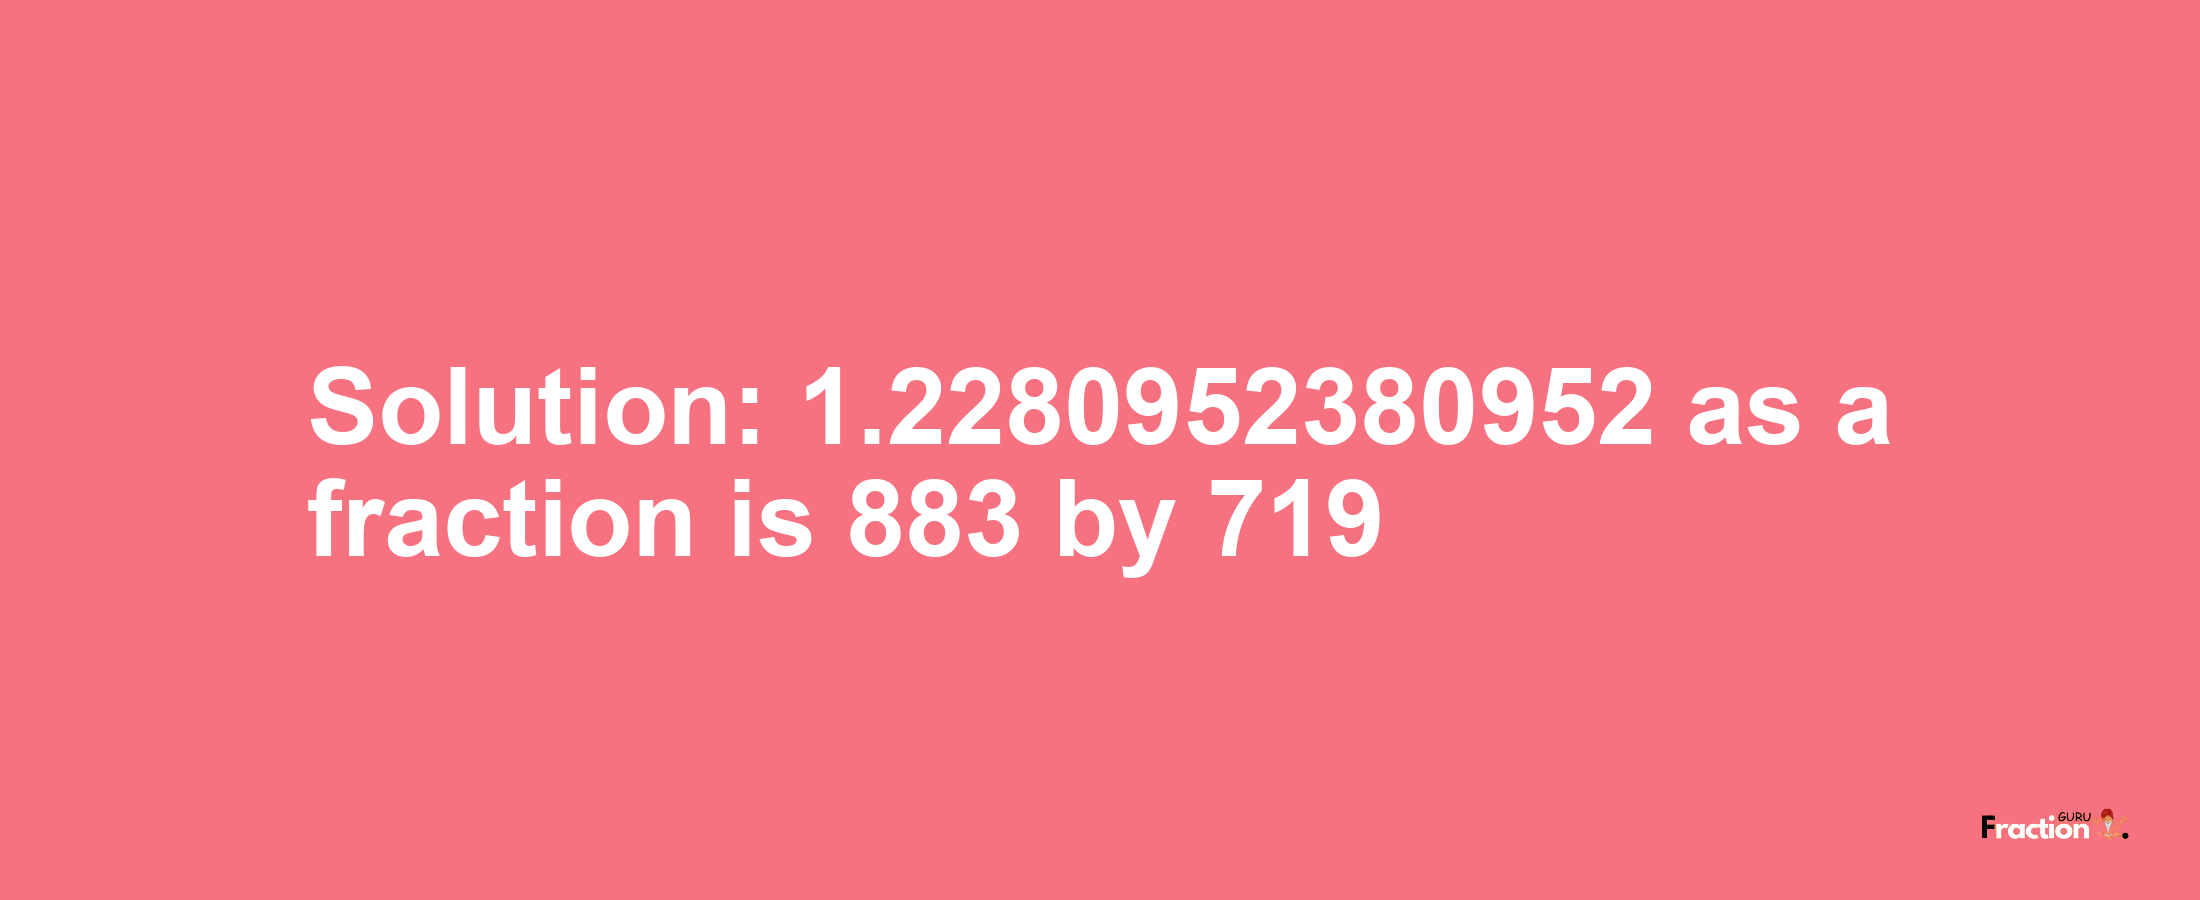 Solution:1.2280952380952 as a fraction is 883/719